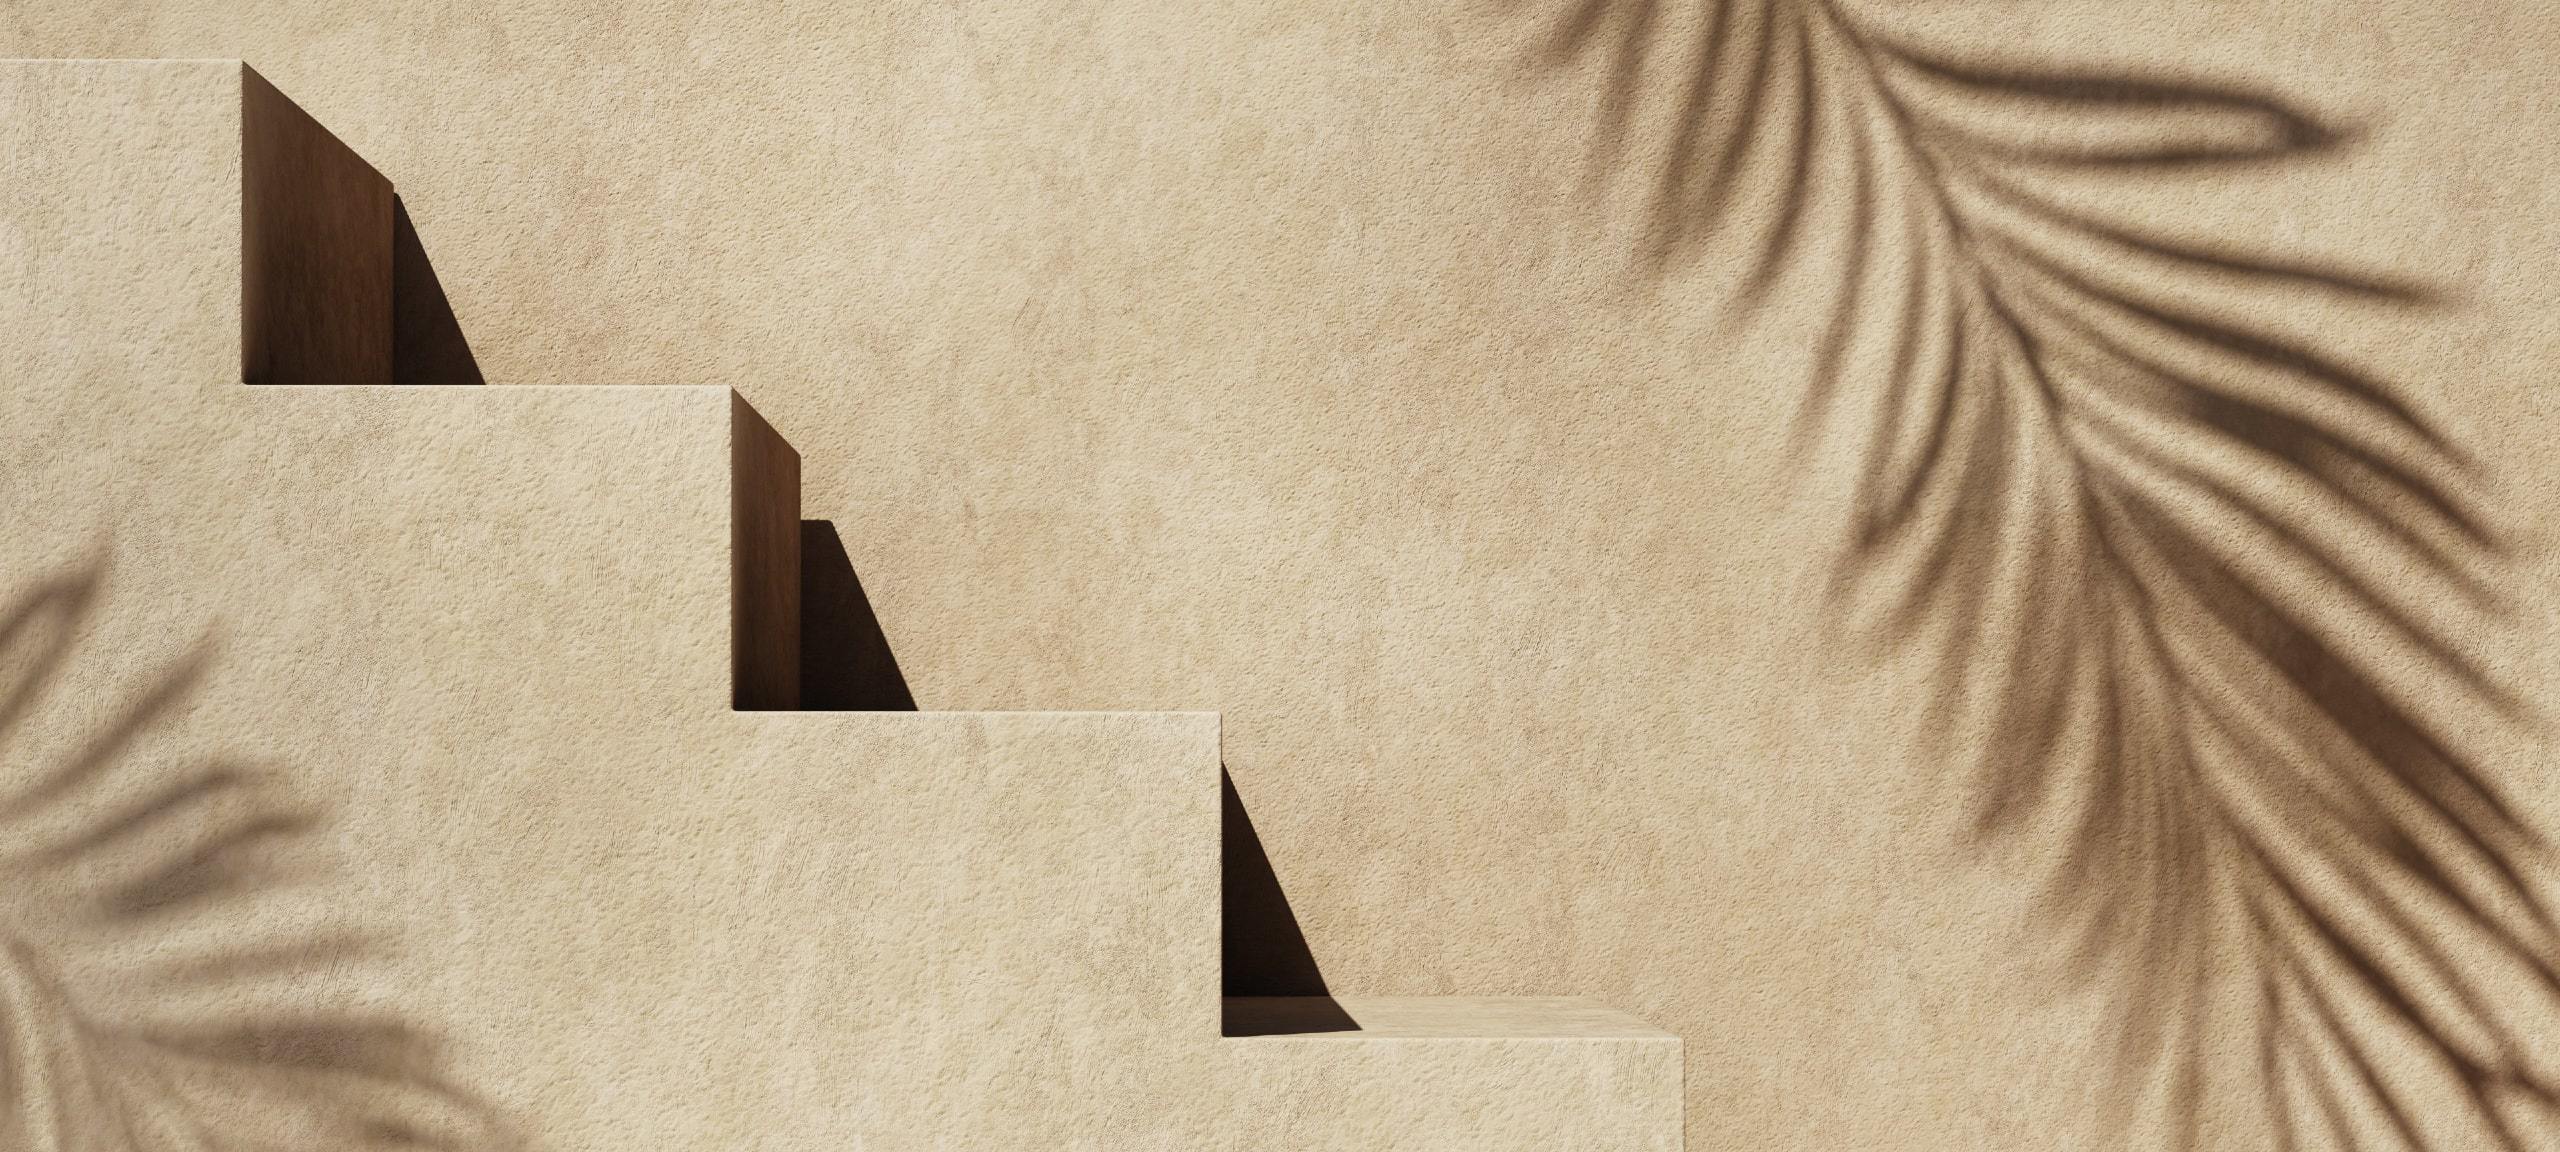 Abstract cement steps and palm tree shadows